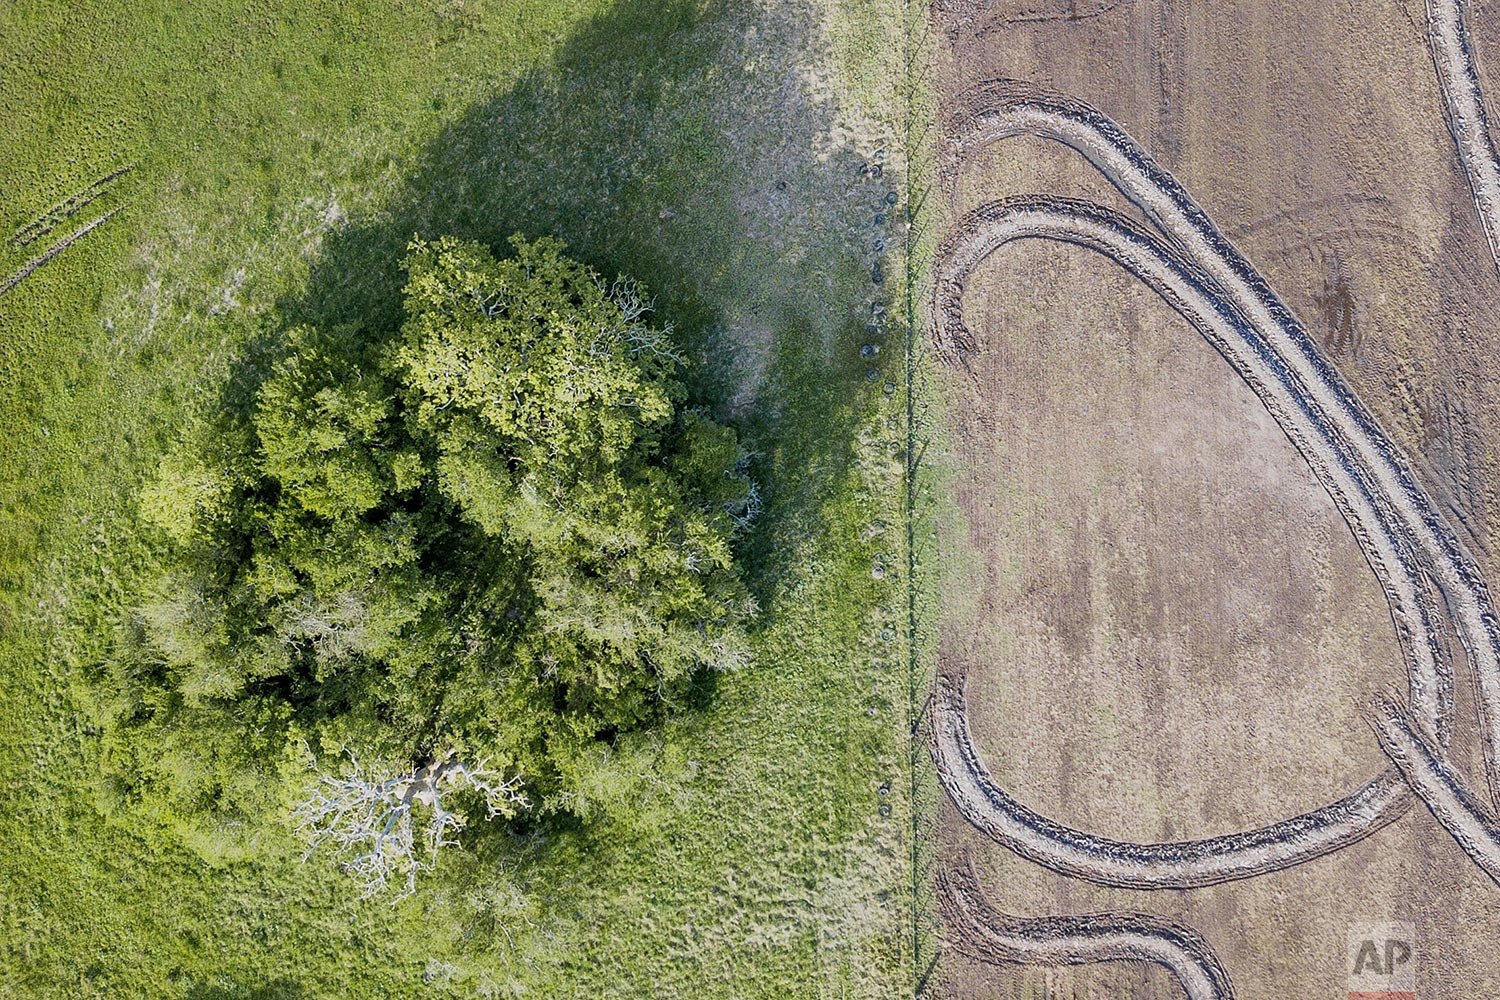  Aerial view of an Indigenous earthen mound, left, known in Spanish as “cerritos de indios”, in Rocha, Uruguay, Nov. 2, 2021. There are more than 3,500 registered cerritos that were a part of the past Indigenous life of what is now Uruguay. (AP Photo